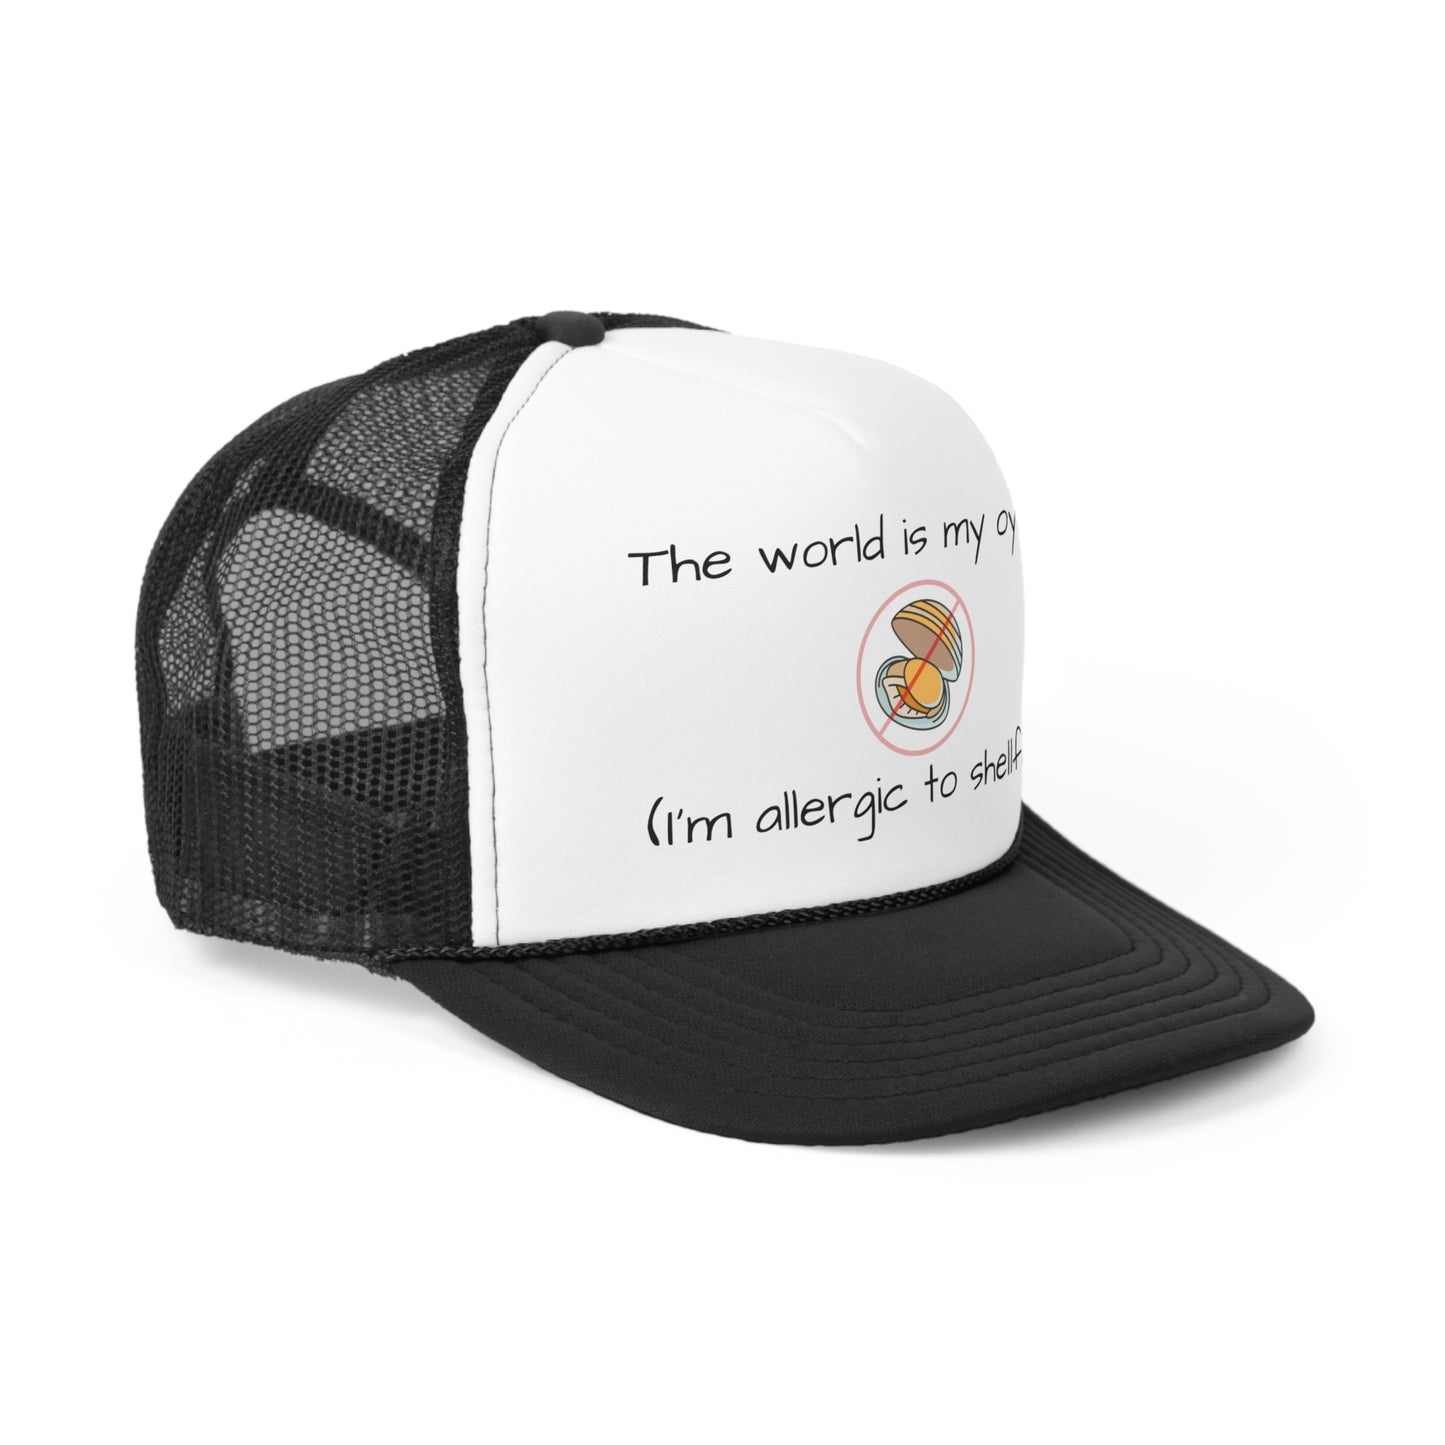 The world is my oyster - trucker hat